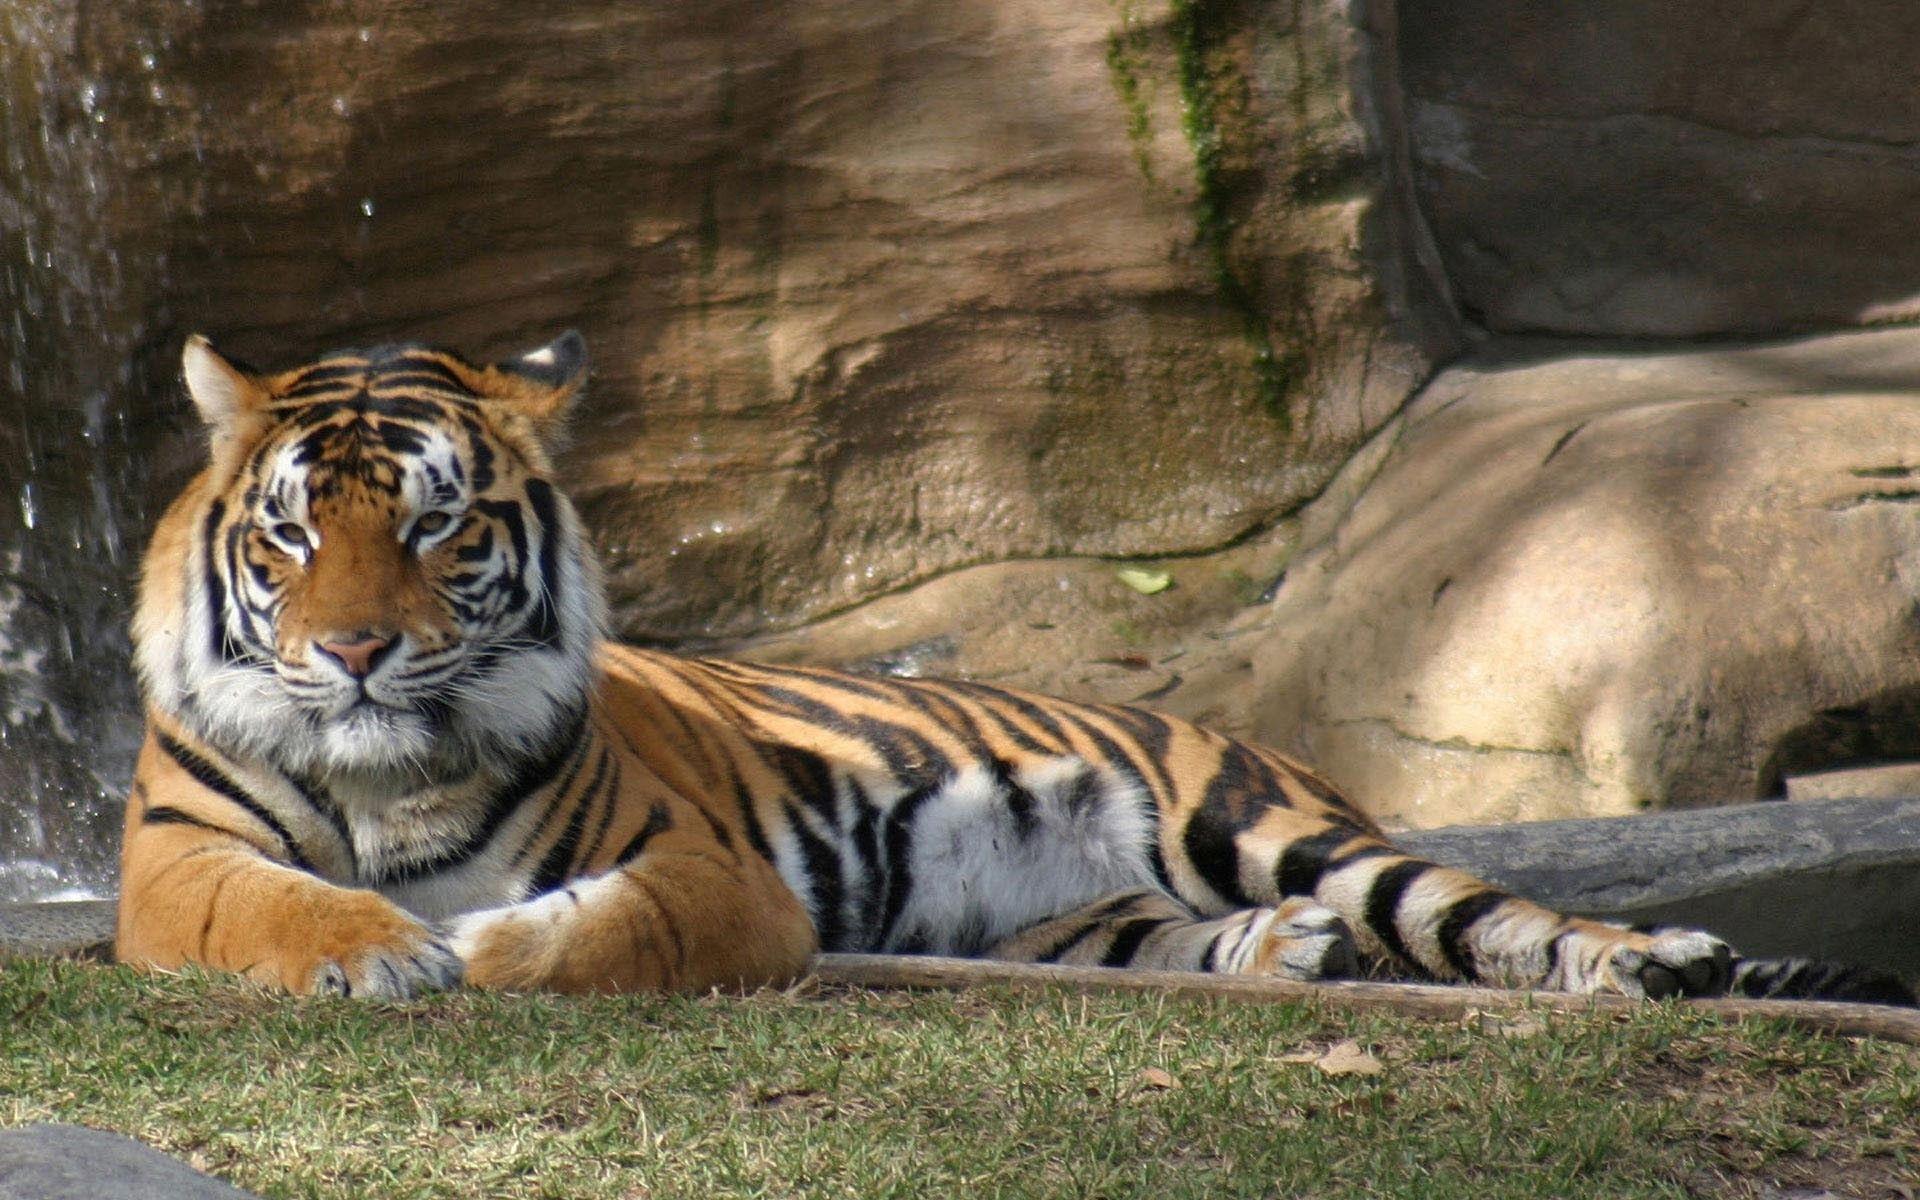 Wallpaper Tiger Lying on Rock Near Green Trees During Daytime Background   Download Free Image